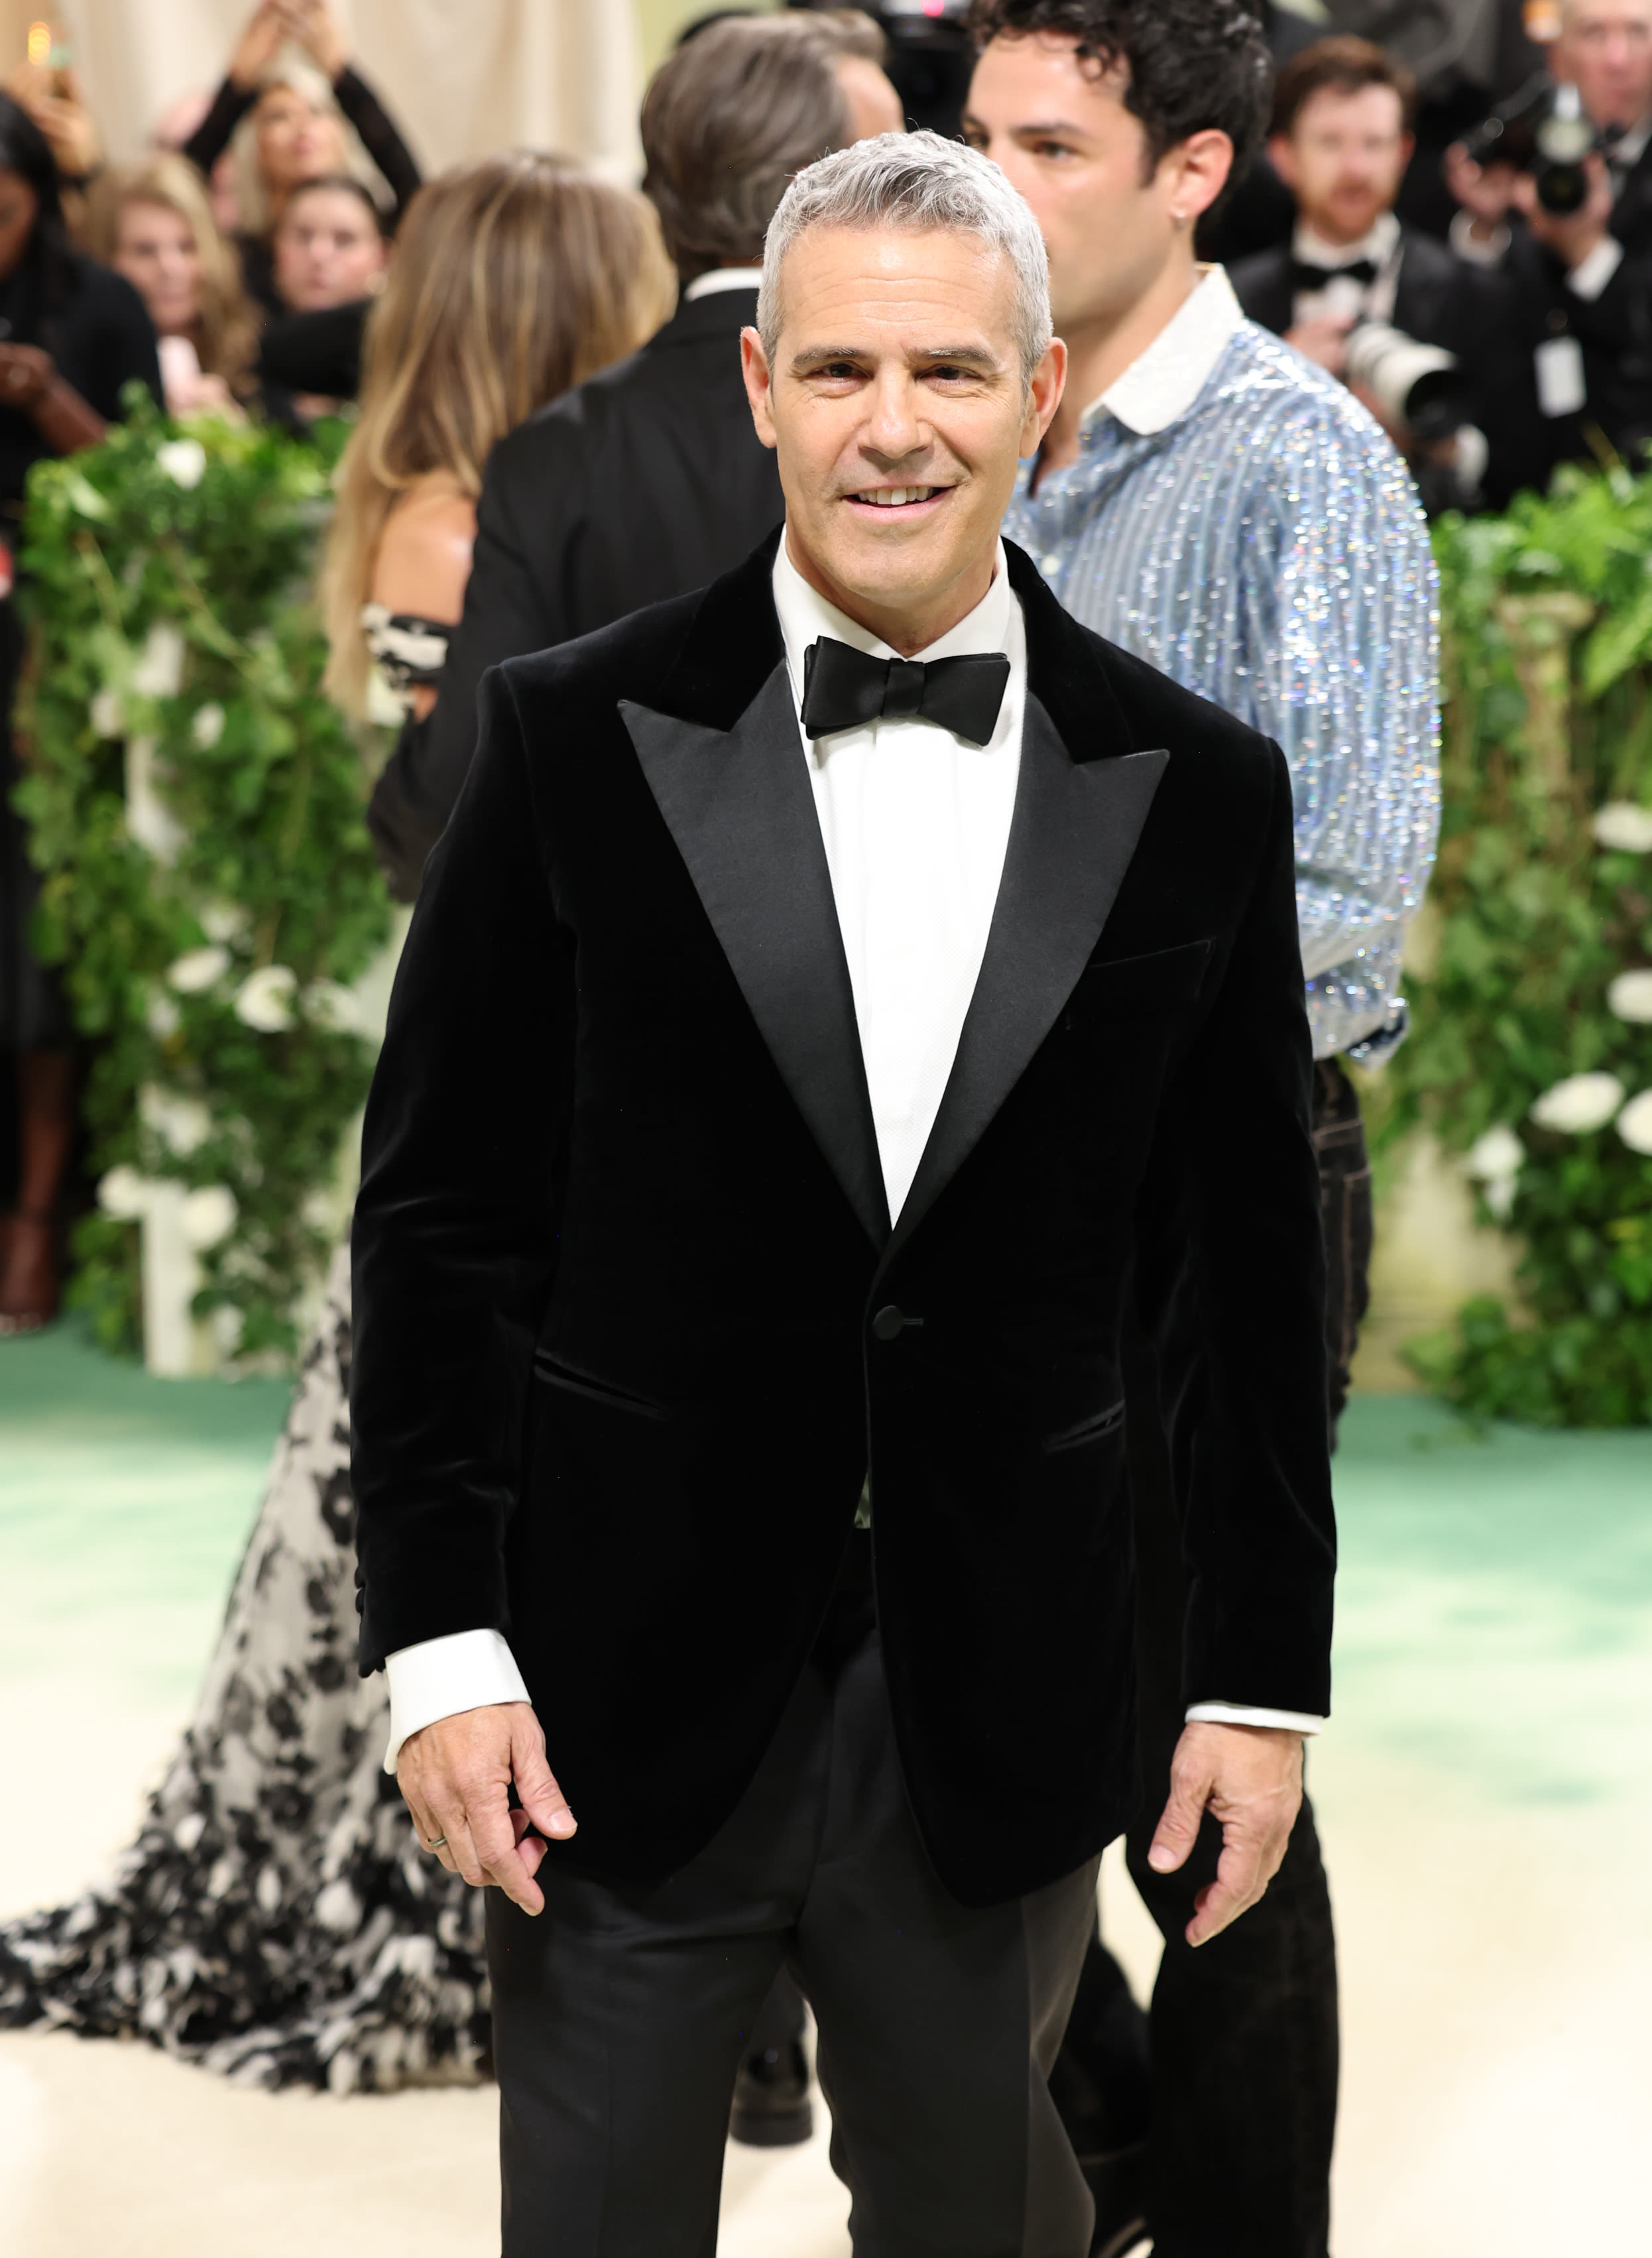 Andy Cohen Breaks Silence on ‘Real Housewives’ Sexual Harassment Accusations: ‘It’s Hurtful’